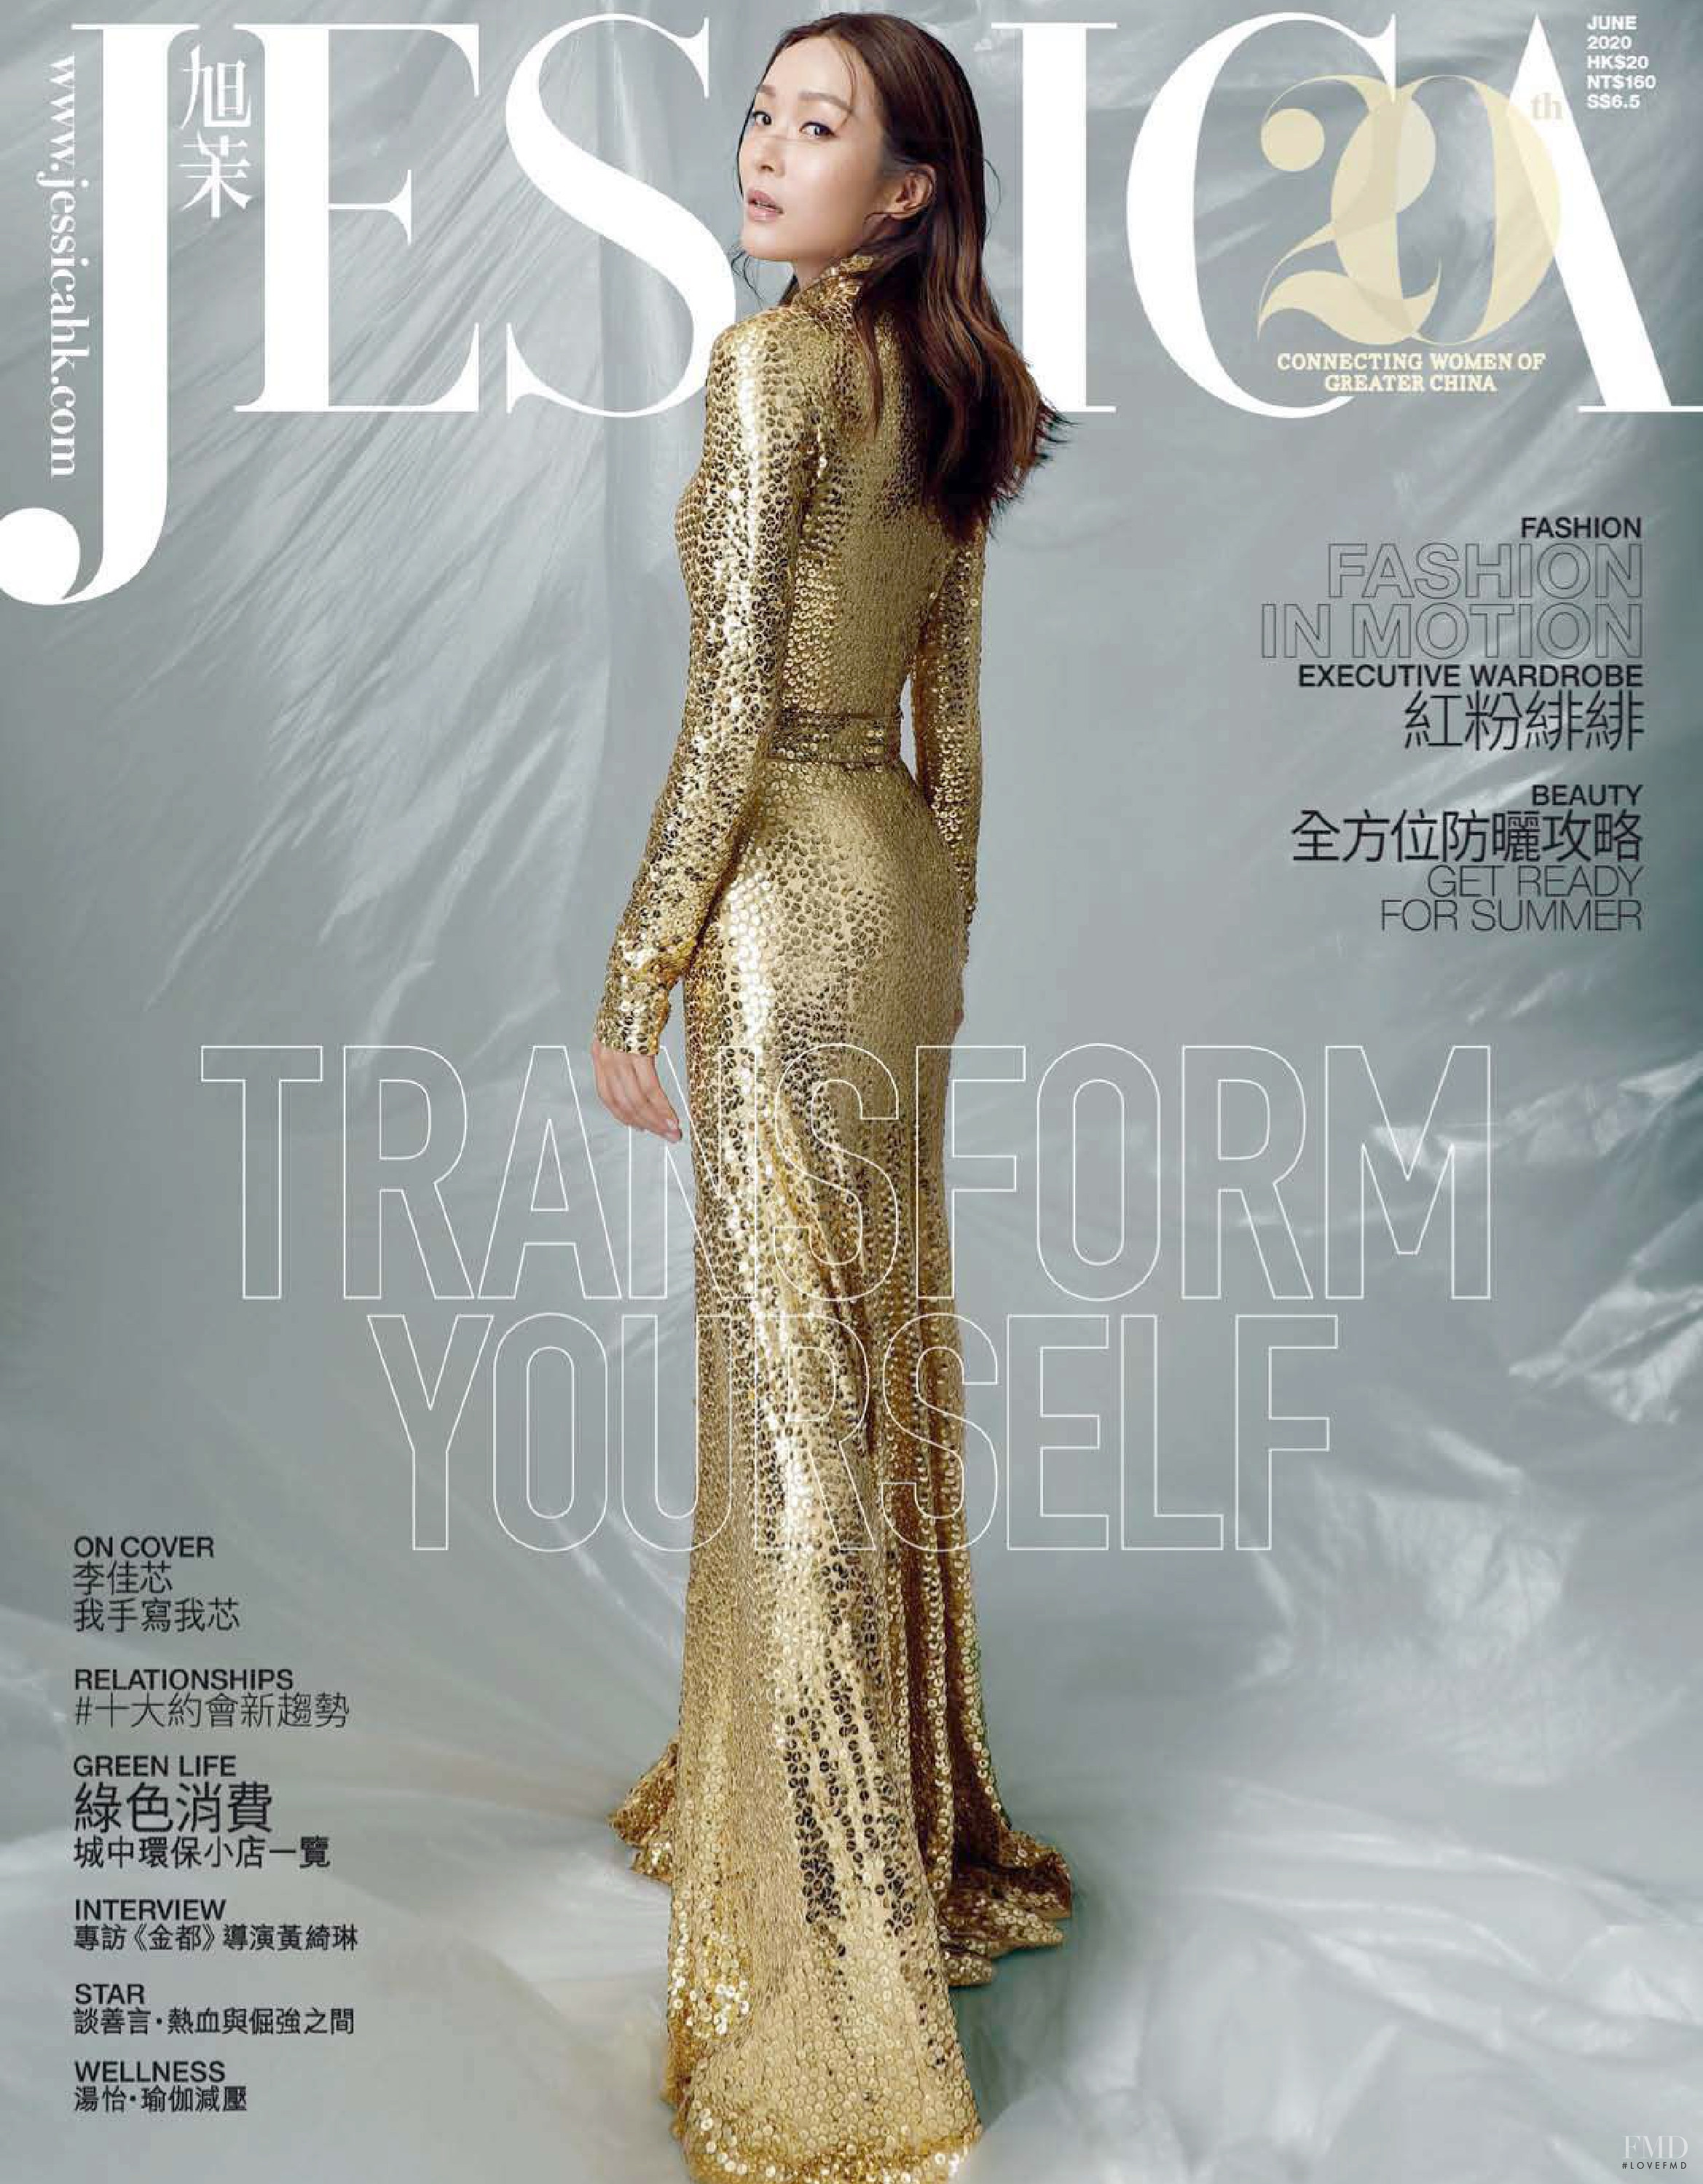 Cover of Jessica Hong Kong , June 2020 (ID:56417)| Magazines | The FMD